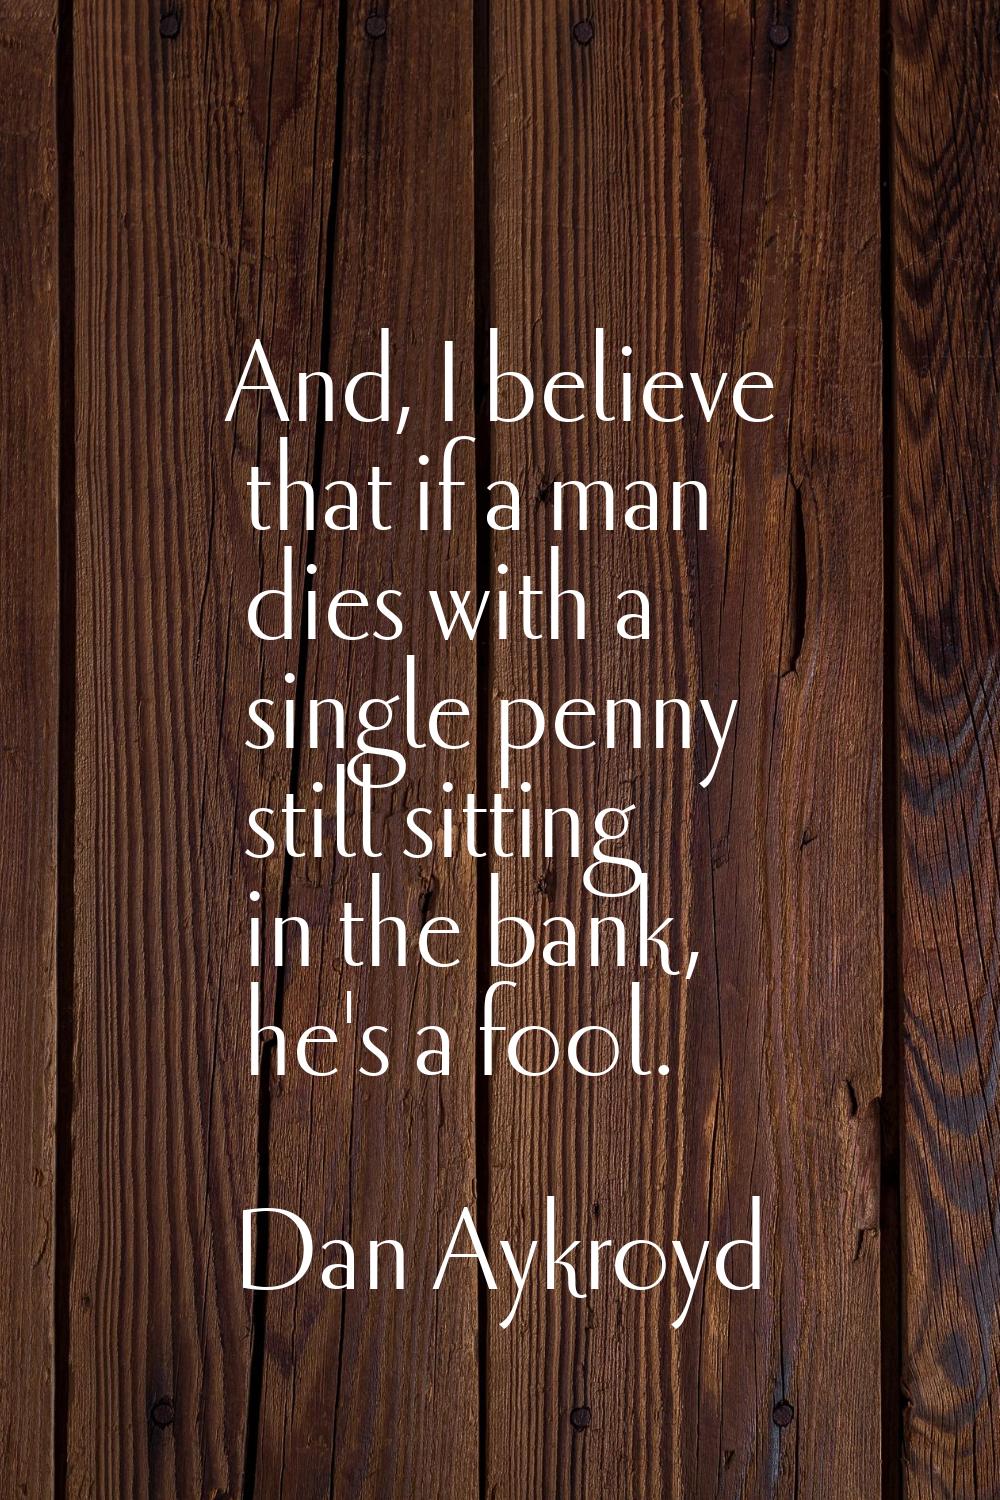 And, I believe that if a man dies with a single penny still sitting in the bank, he's a fool.